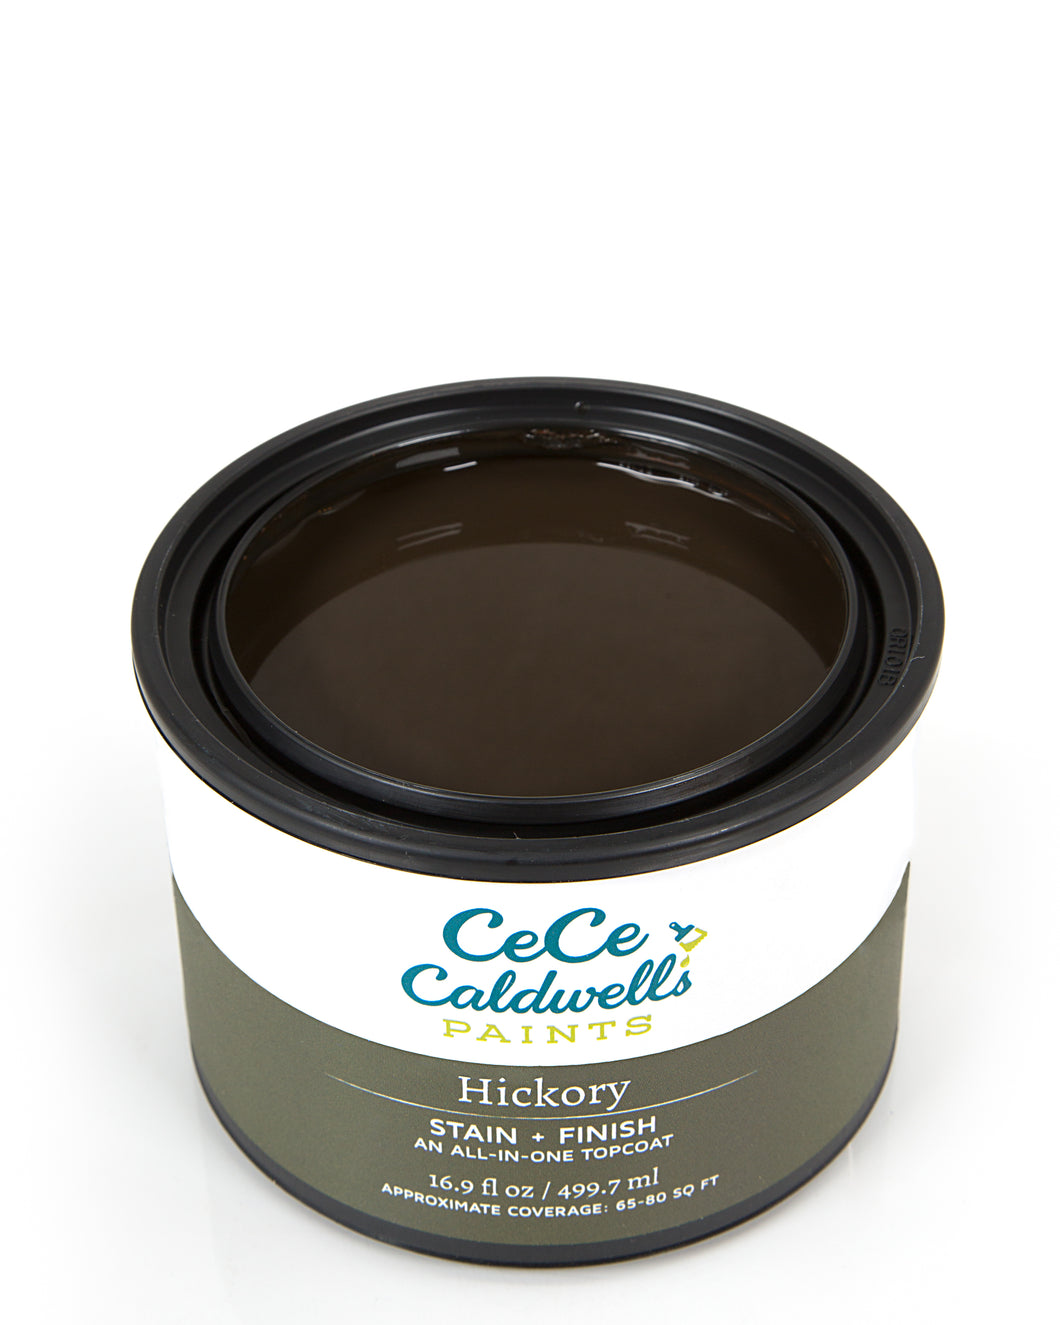 Hickory Stain CeCe Caldwell